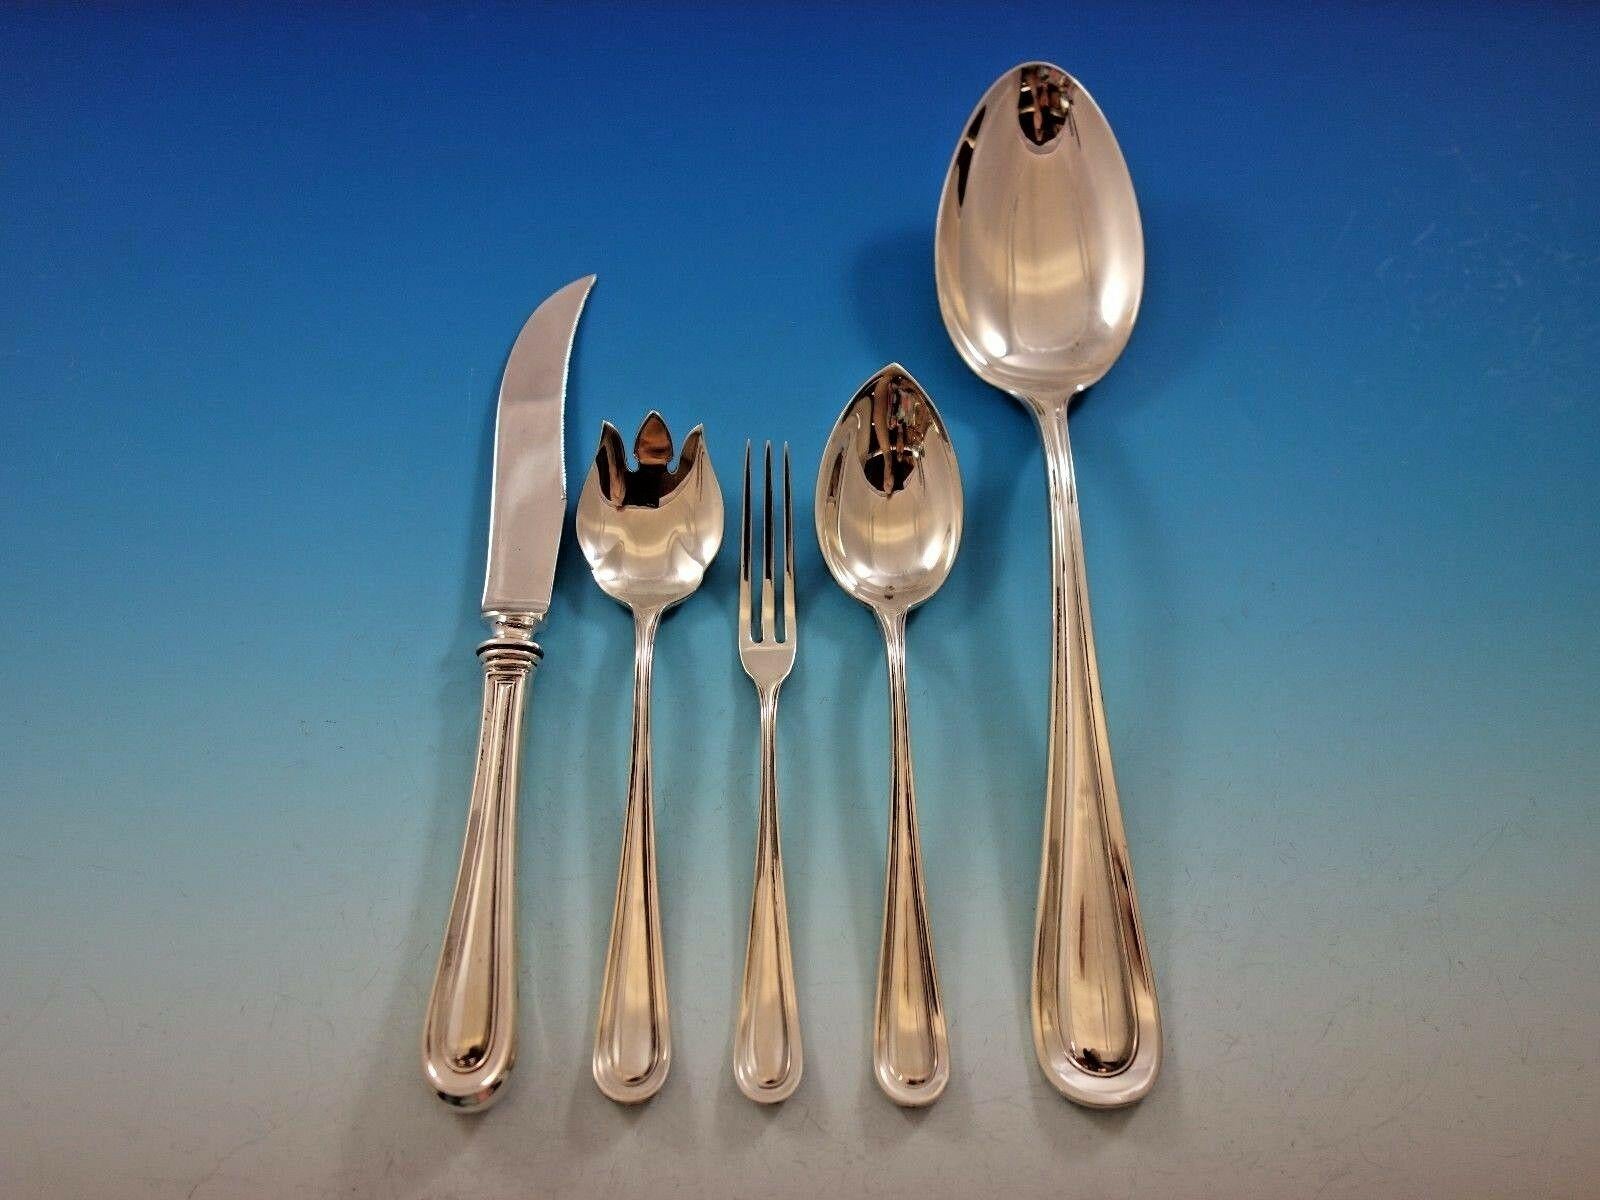 Rare Sedgwick by Mount Vernon circa 1905 sterling silver flatware set, 128 pieces. This set includes:

8 dinner knives, 10